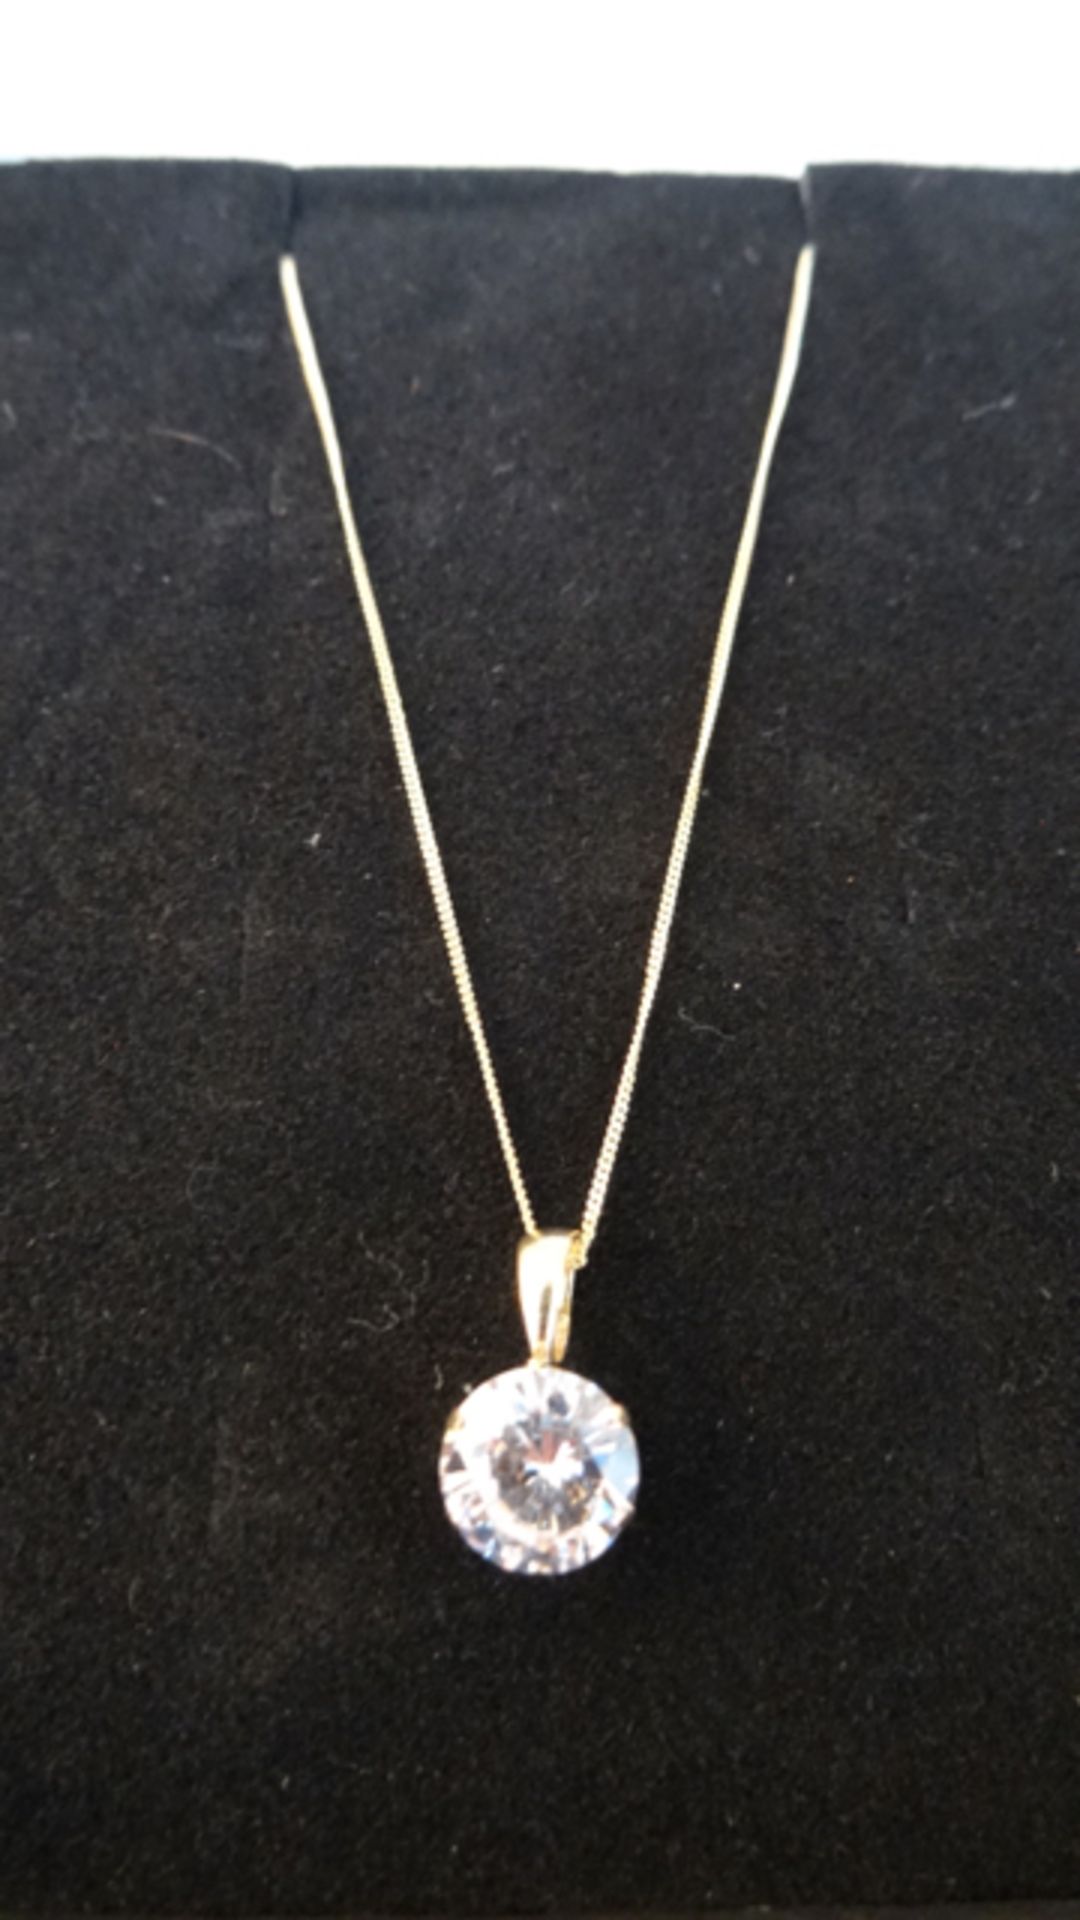 2 x 9 Carat Yellow Gold Chain with Cubic Zirconia Pendant. Retail value £158. UK TRACKED DELIVERY - Image 2 of 3